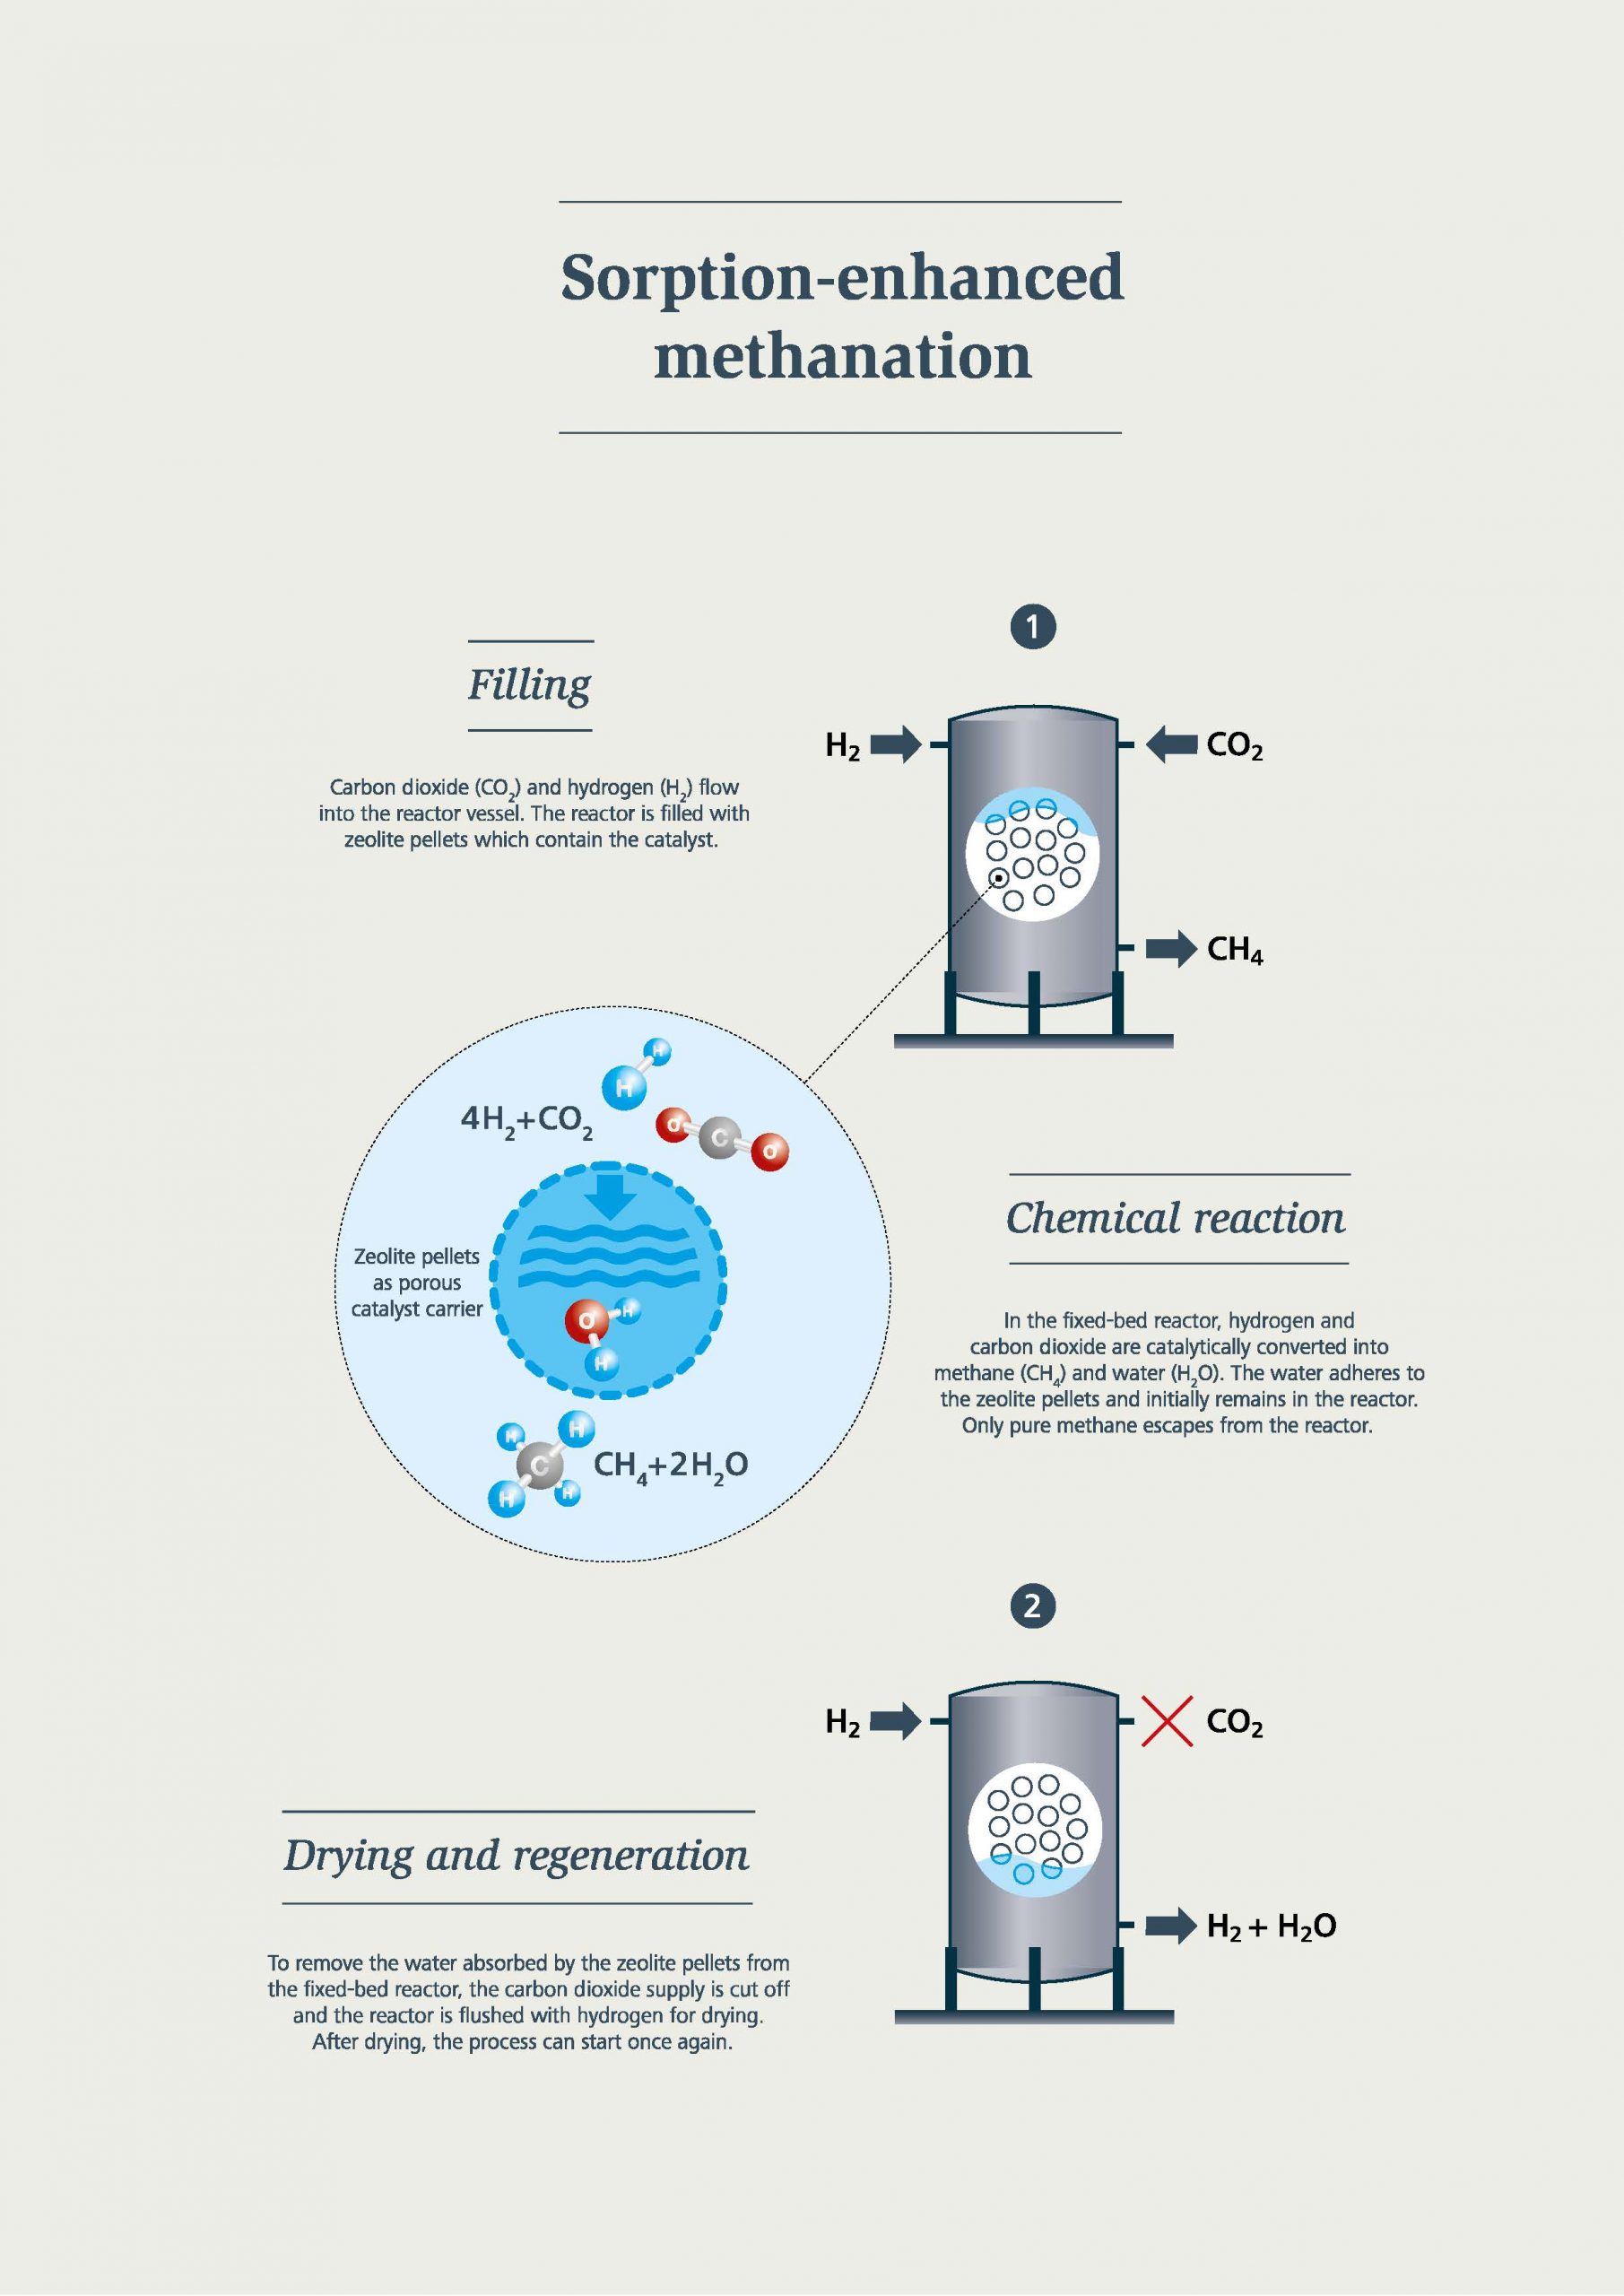 Infographic about sorption-enhanced methanation: Filling, chemical reaction and drying and regeneration